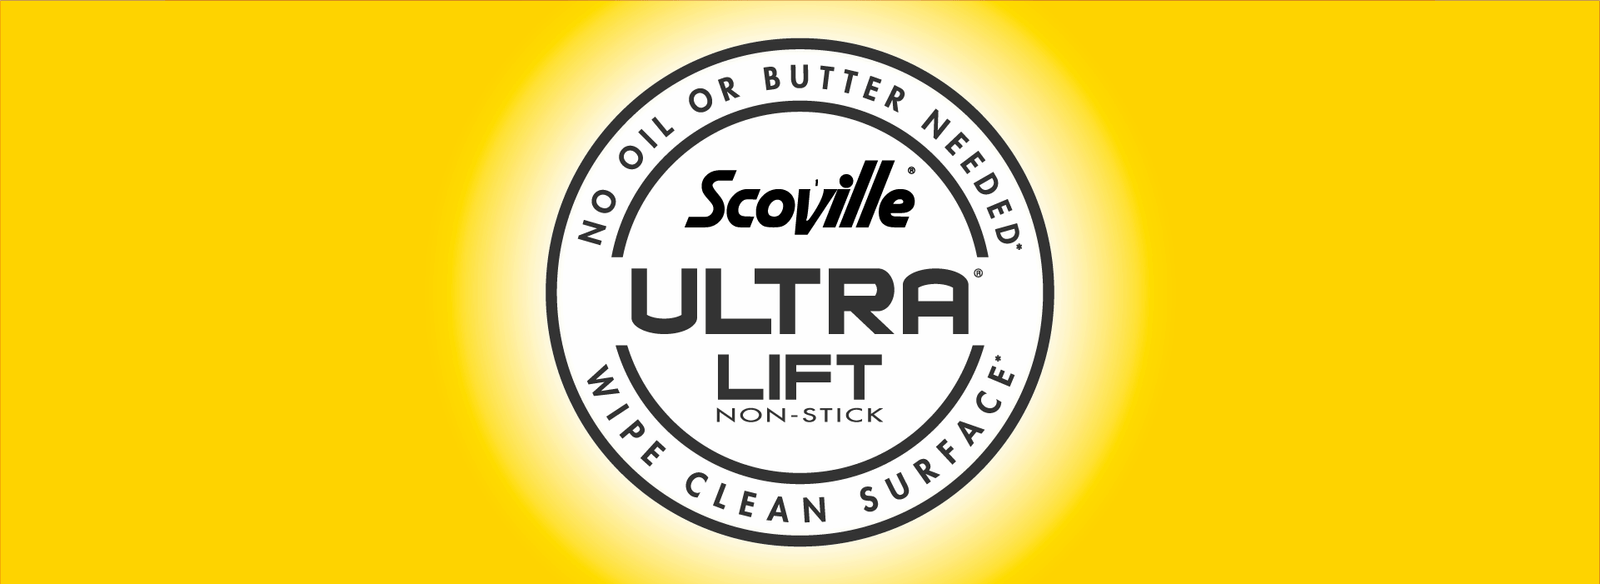 Scoville ULTRA LIFT - No Need for Oil or Butter